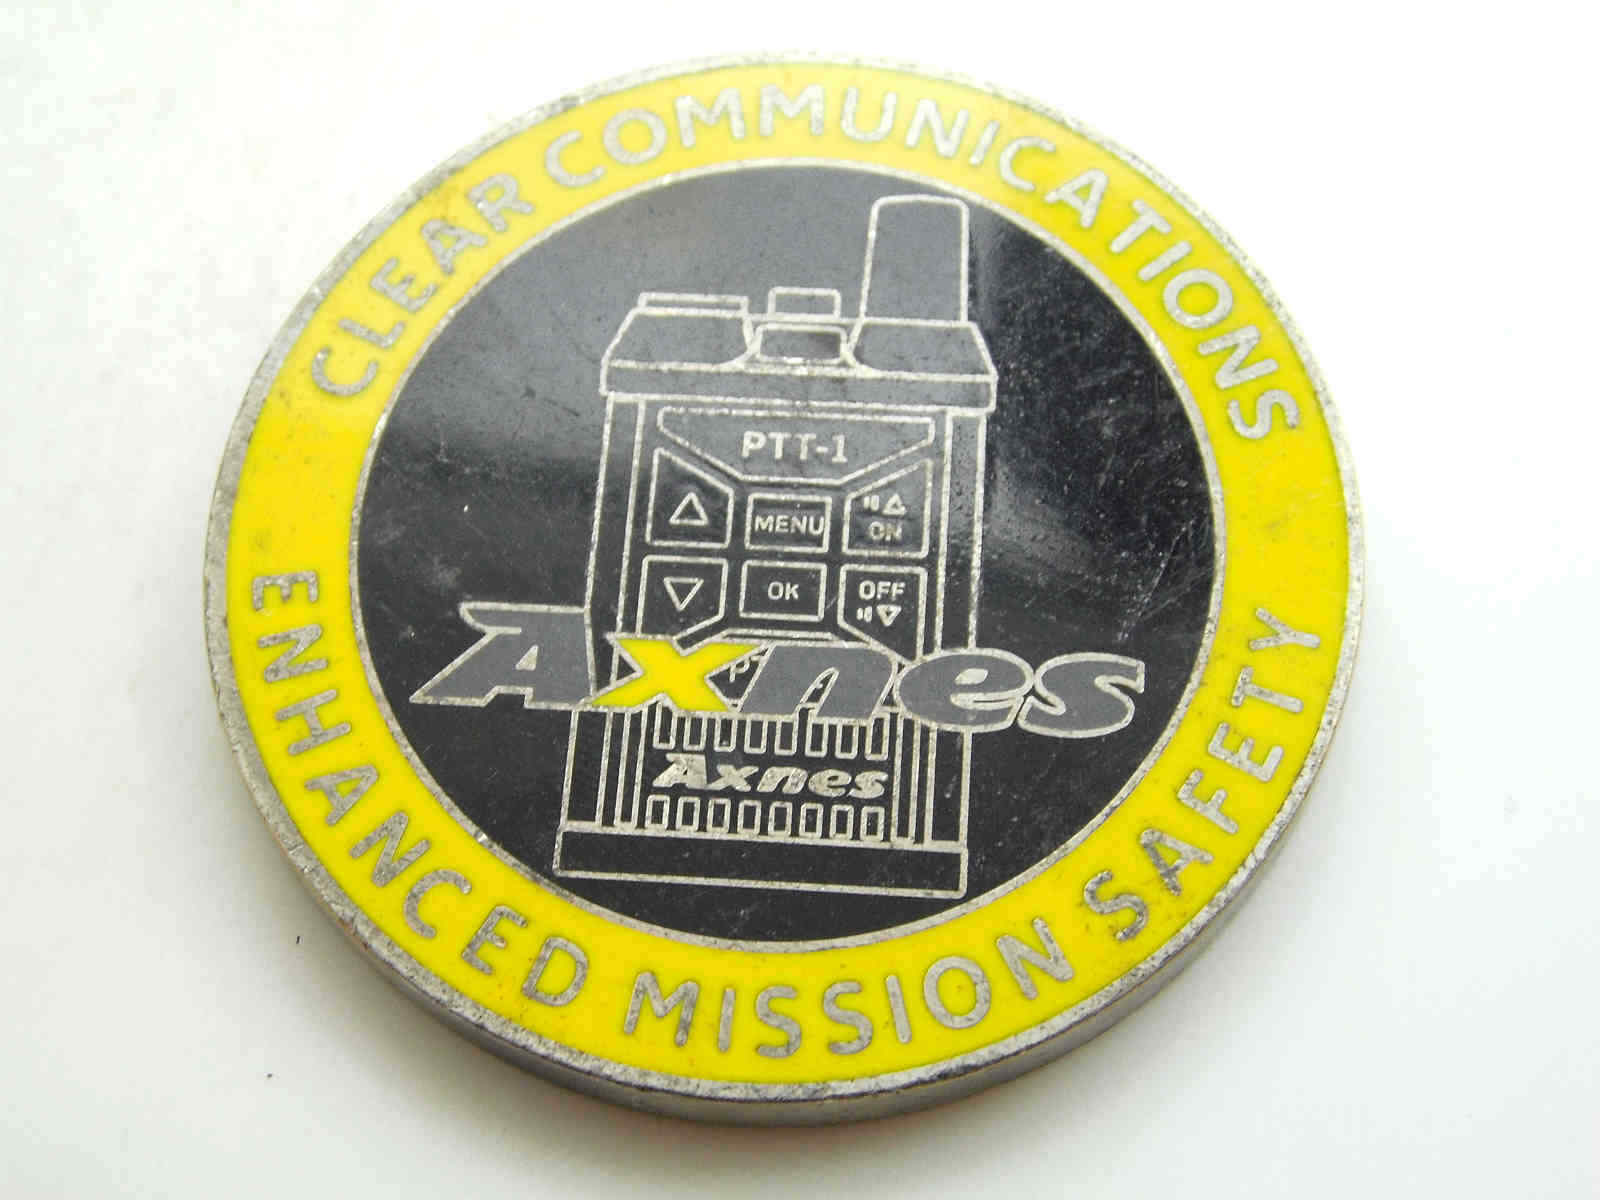 MISSION WIRELESS INTERCOM AXNES CLEAR COMMUNICATIONS ENHANCED CHALLENGE COIN